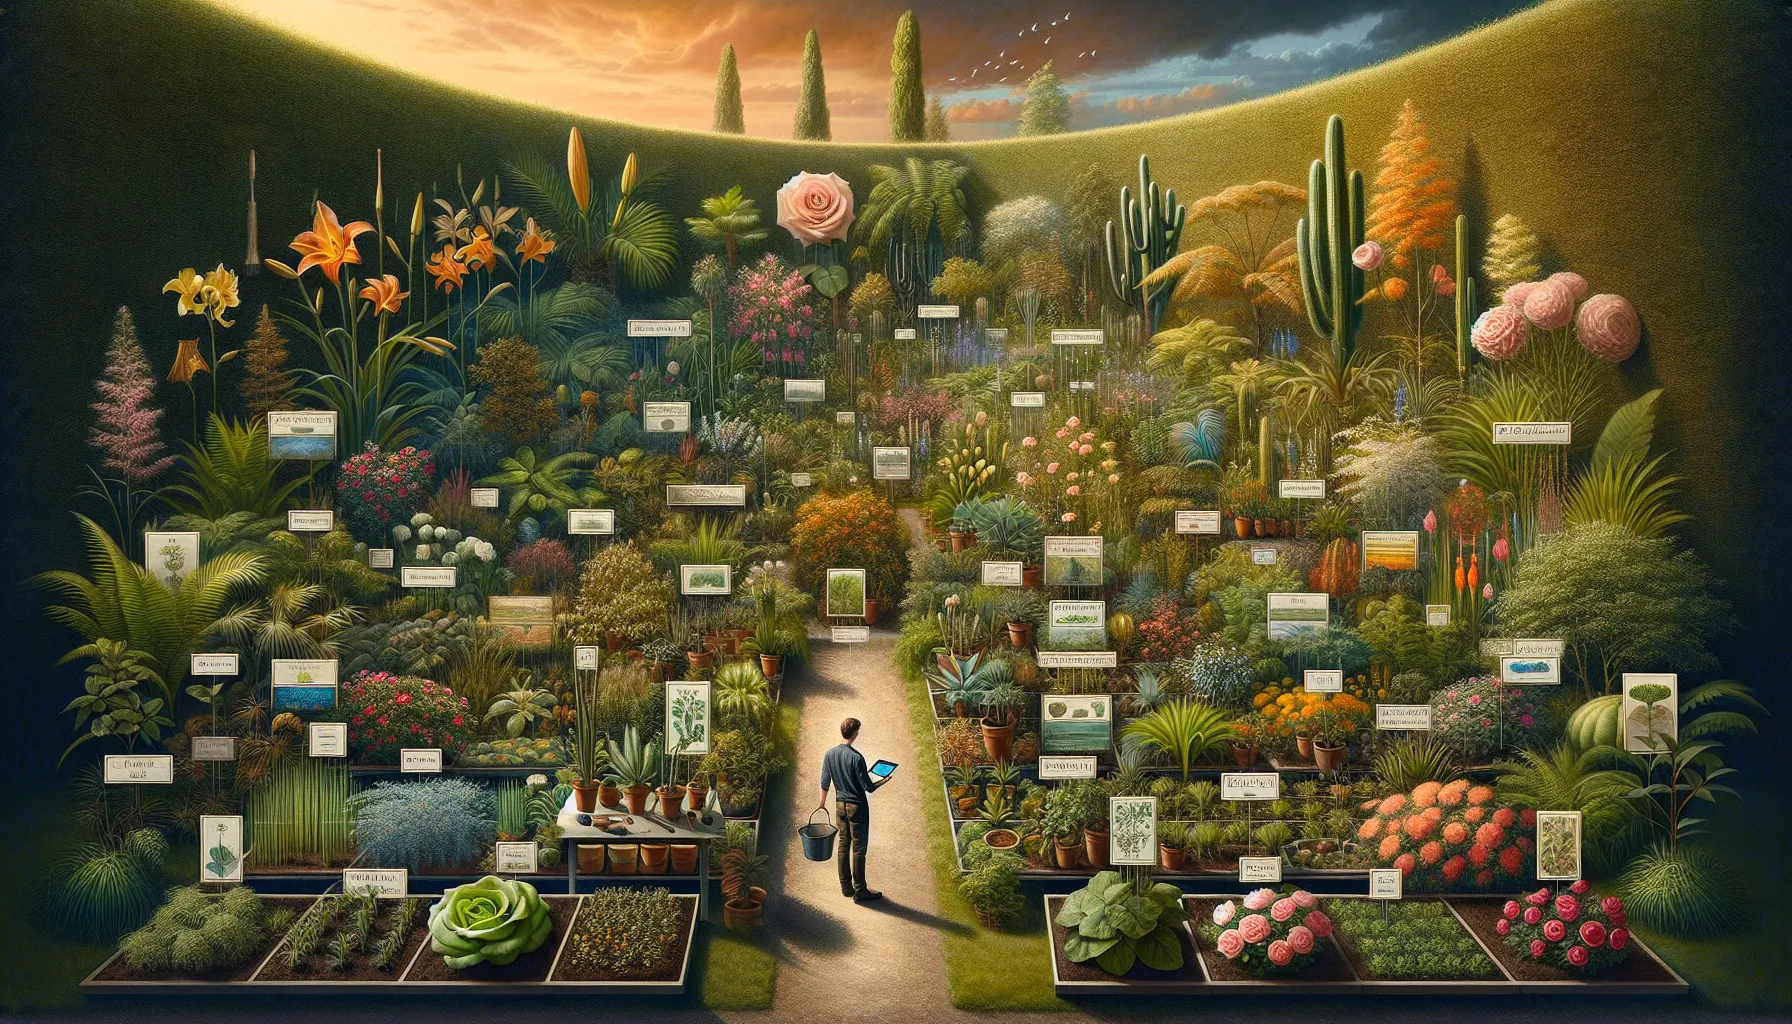 A person walks down a path through an artistic representation of a lush garden center with numerous plants accompanied by garden plant guides.